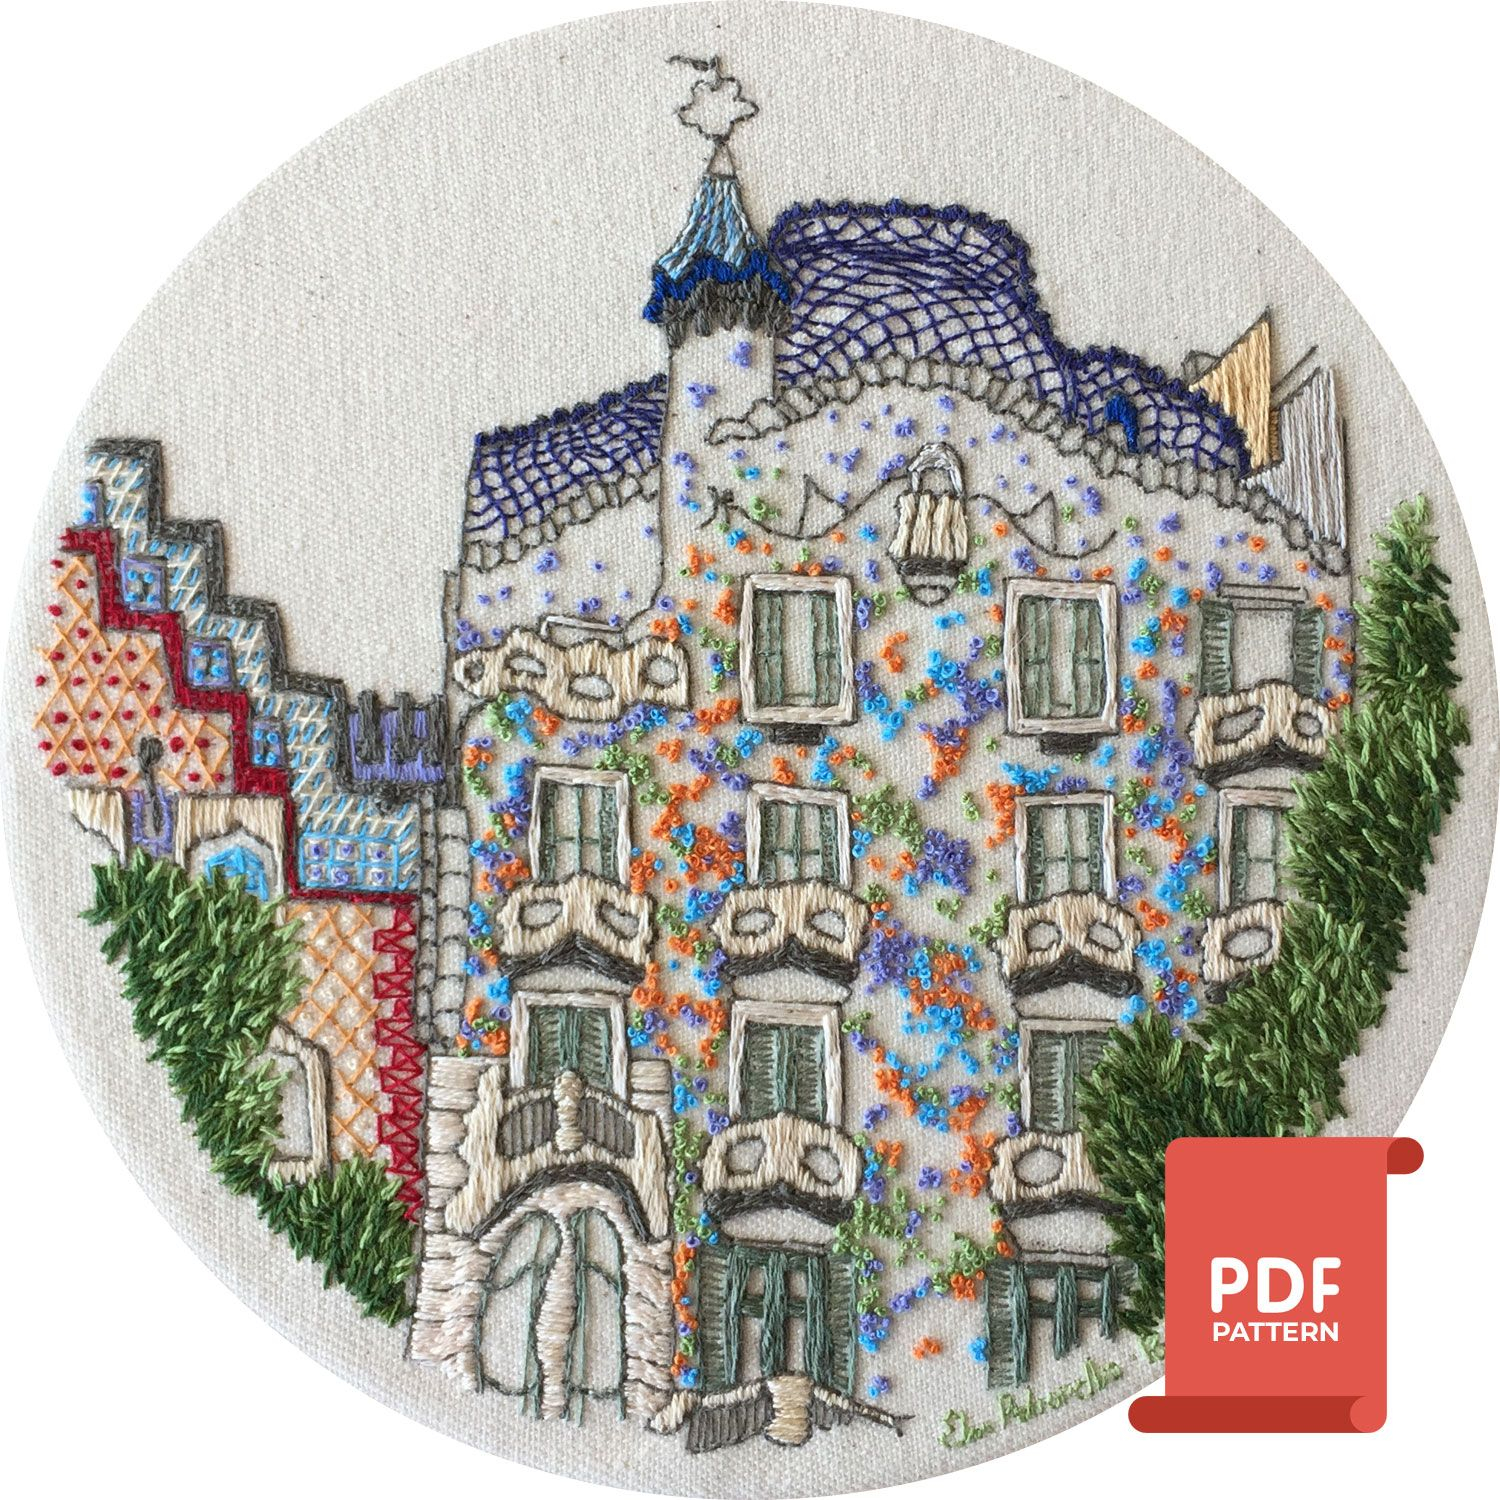 French Knots Embroidery Patterns French Knot Pattern Of Casa Battlo Hand Embroidery